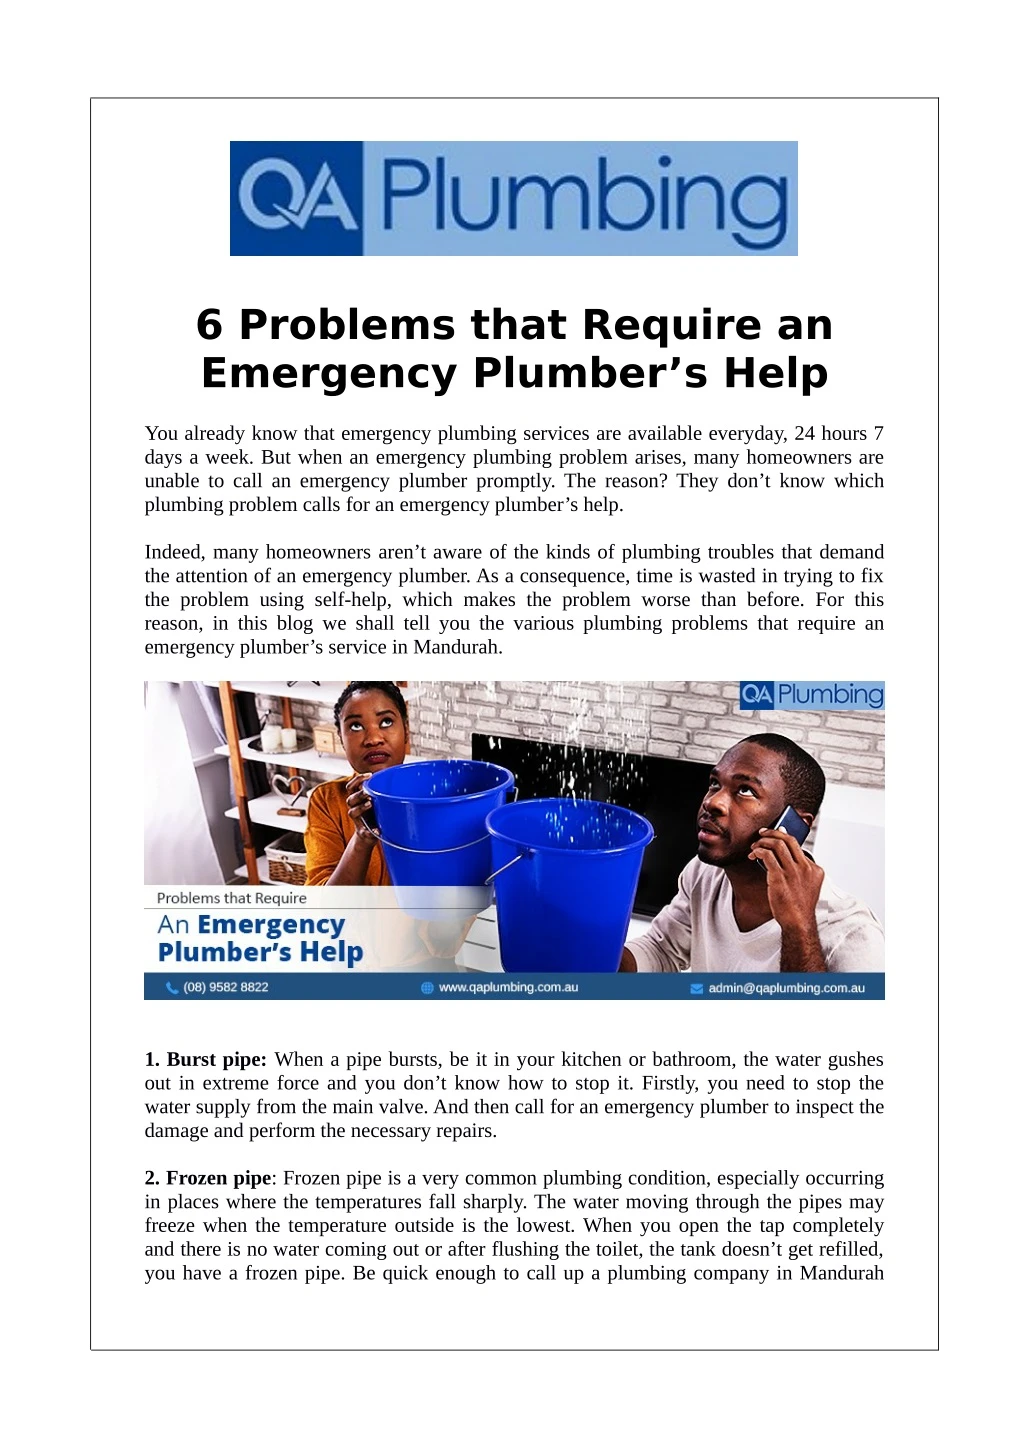 6 problems that require an emergency plumber